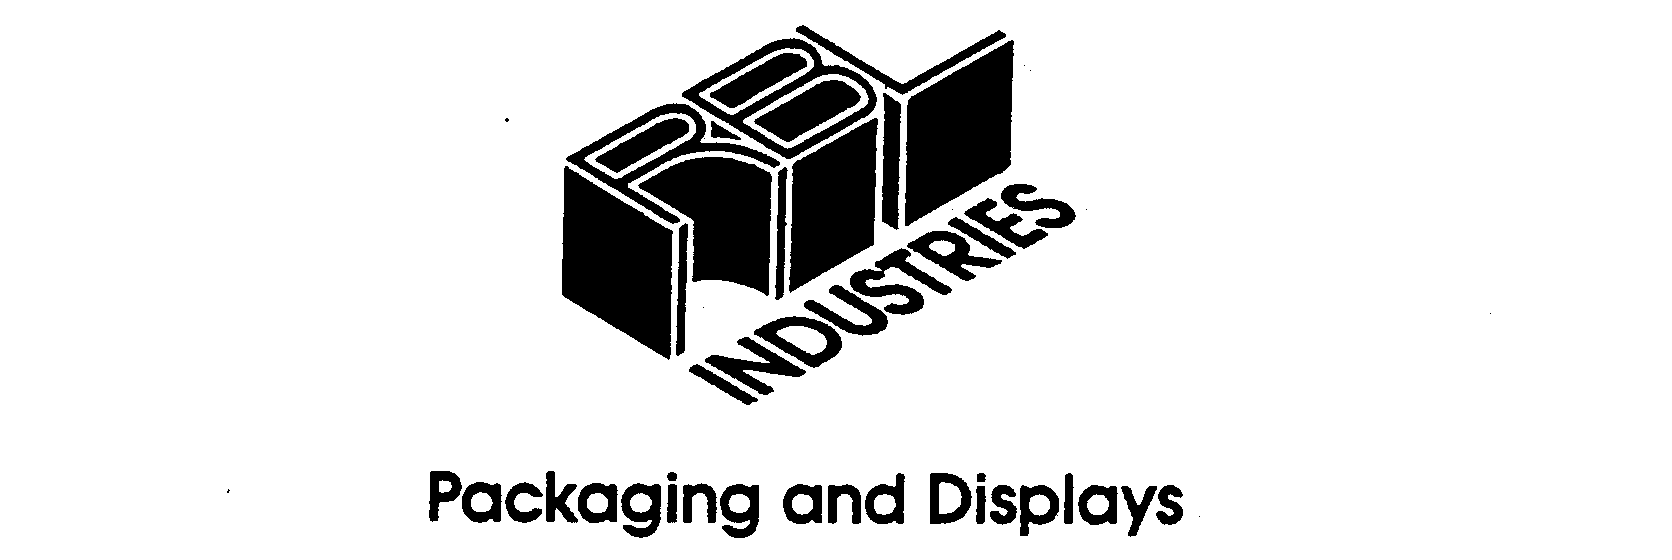 Trademark Logo RBL INDUSTRIES PACKAGING AND DISPLAYS